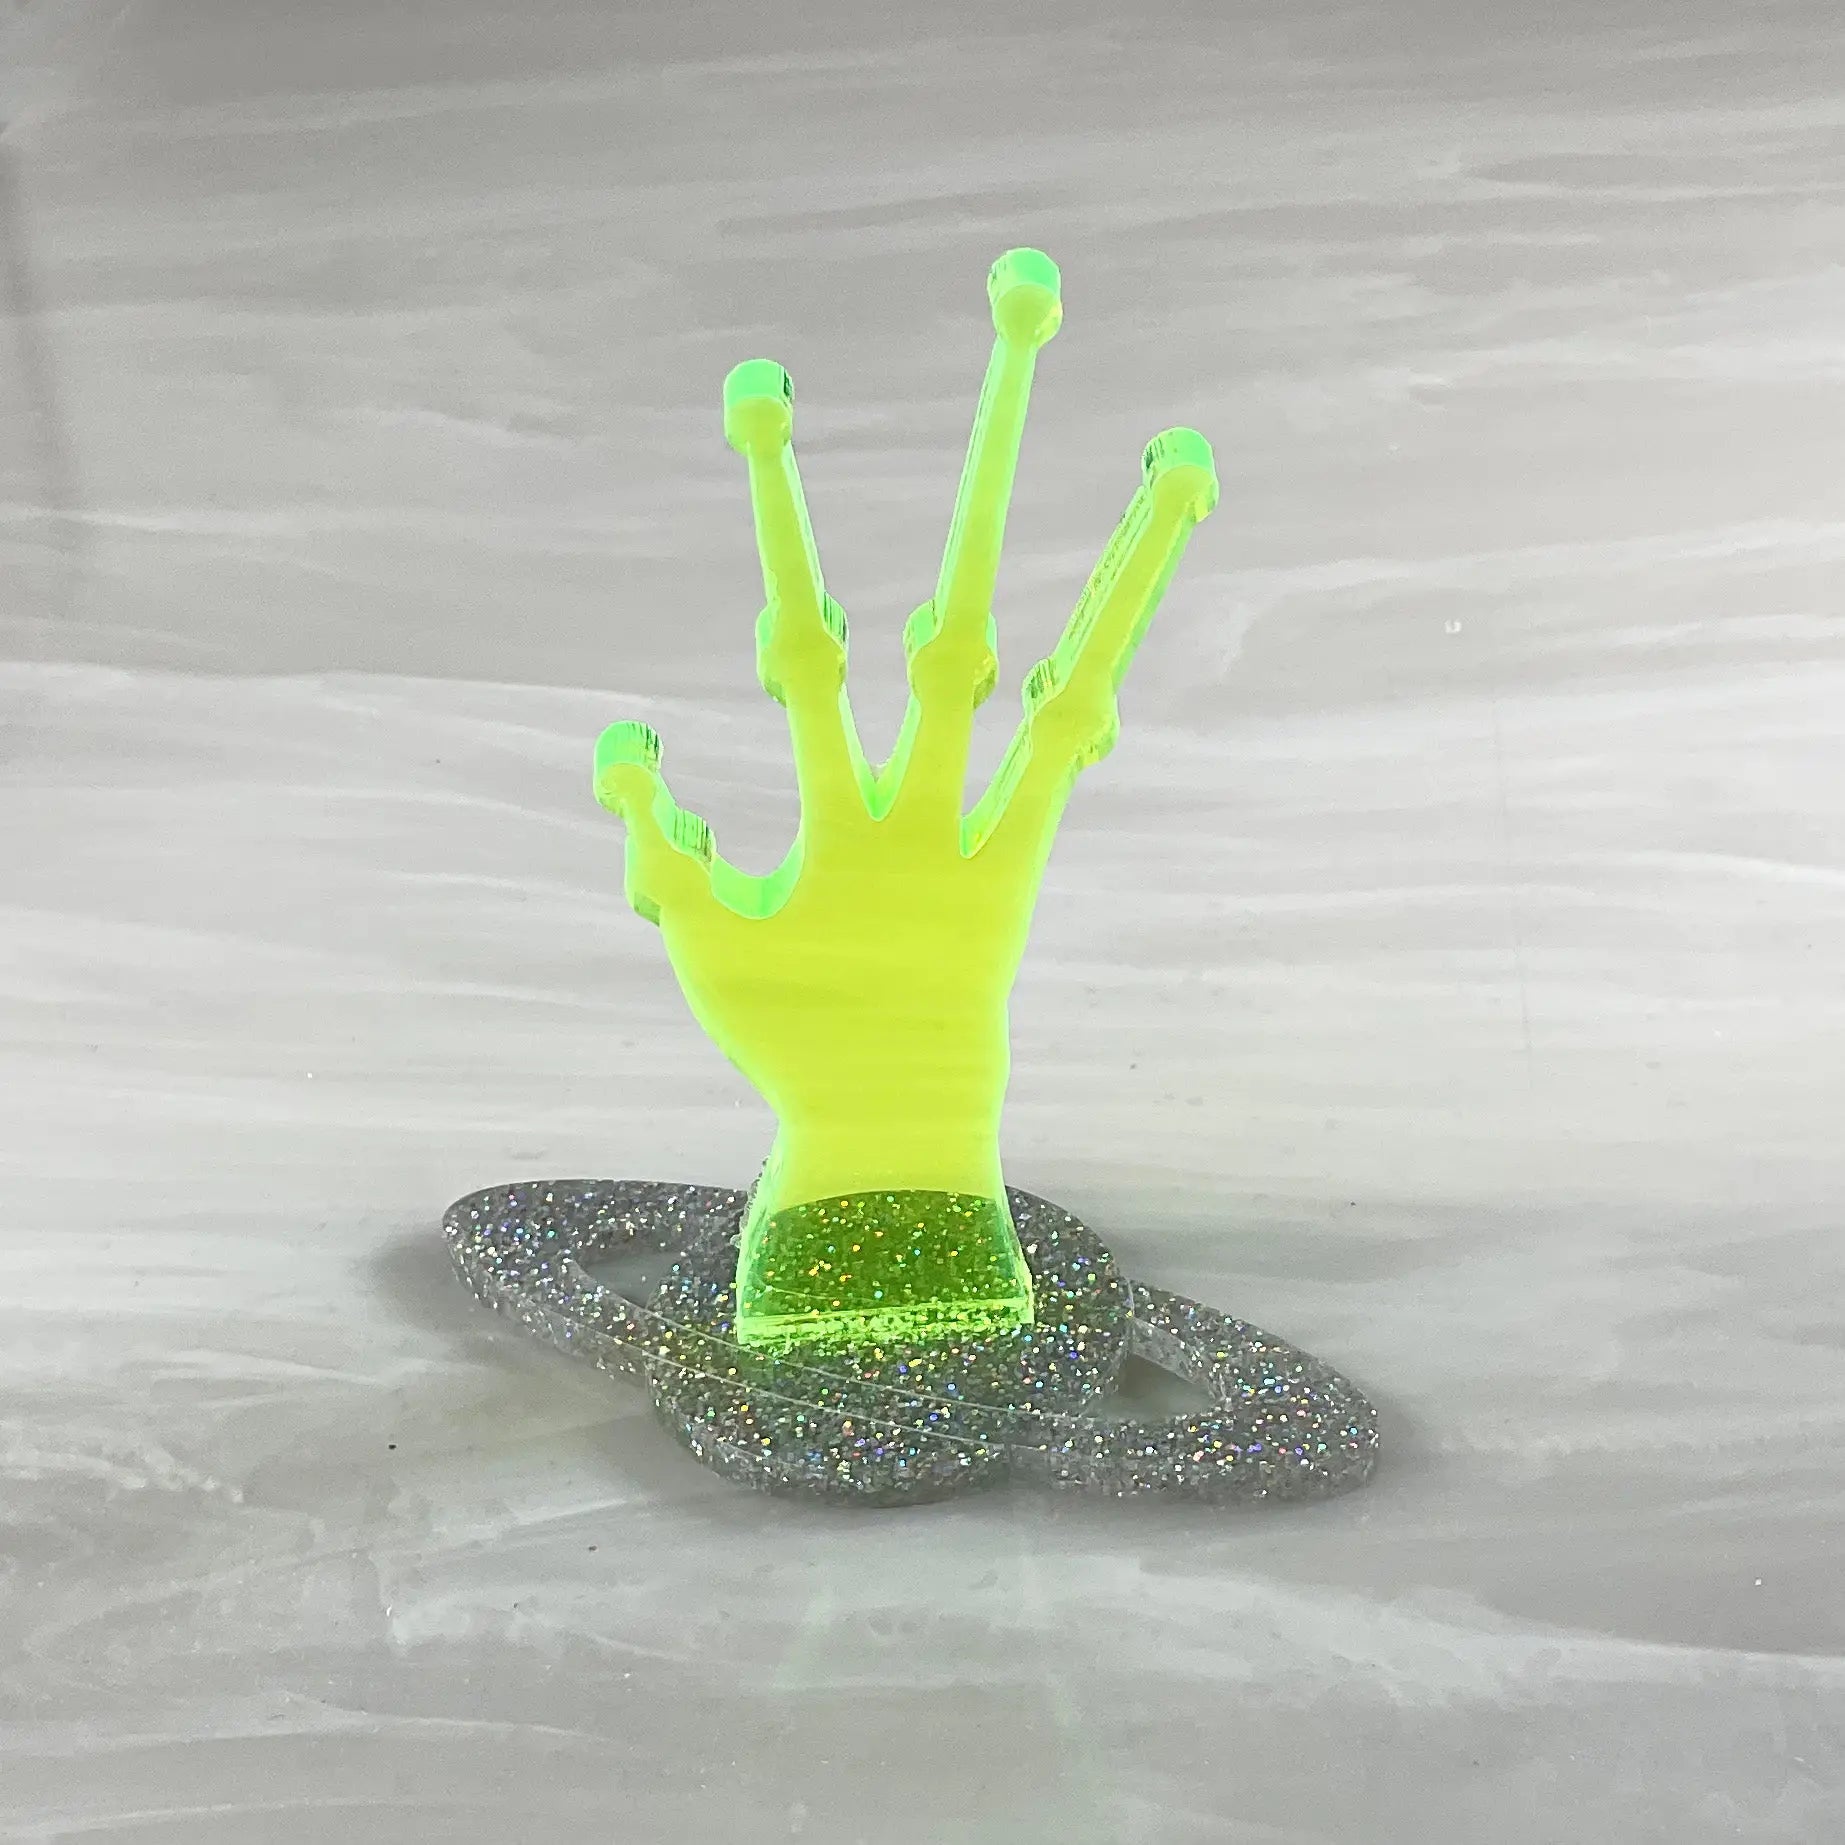 A ring holder made of acrylic in the shape of a neon green alien hand on a silver glittery Saturn shaped base.